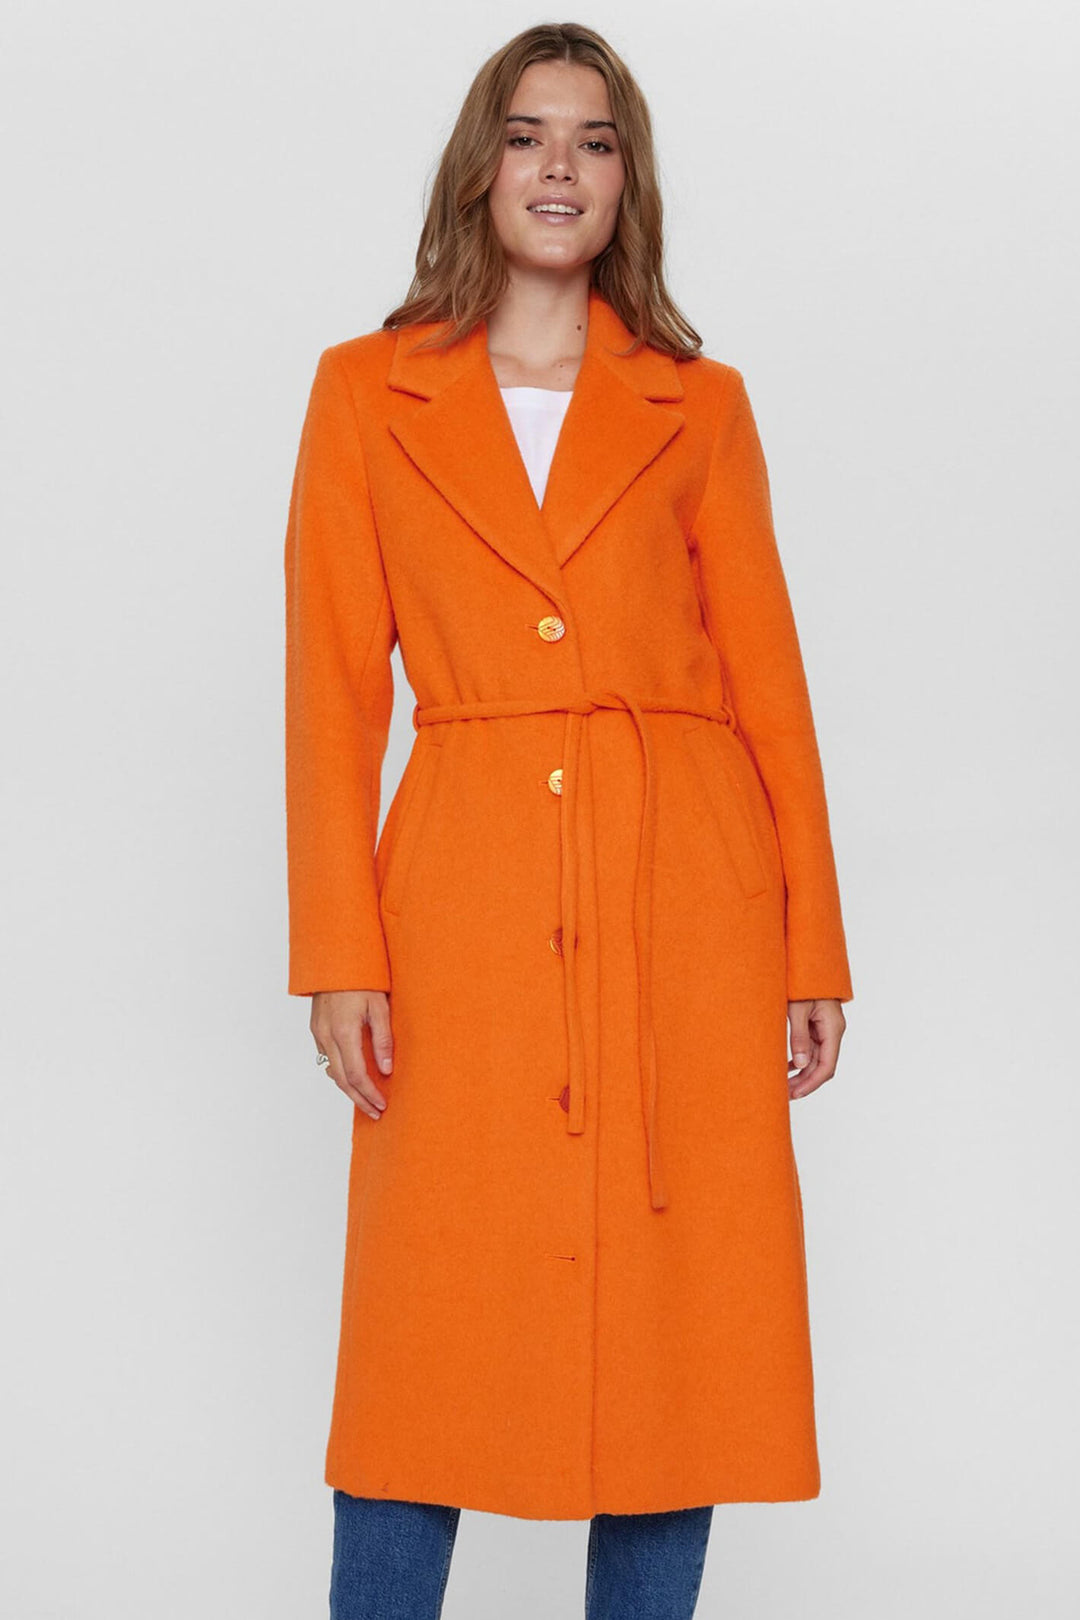 Numph Nugry 703369 Red Orange Wool Mix Button Front Coat - Shirley Allum Boutique